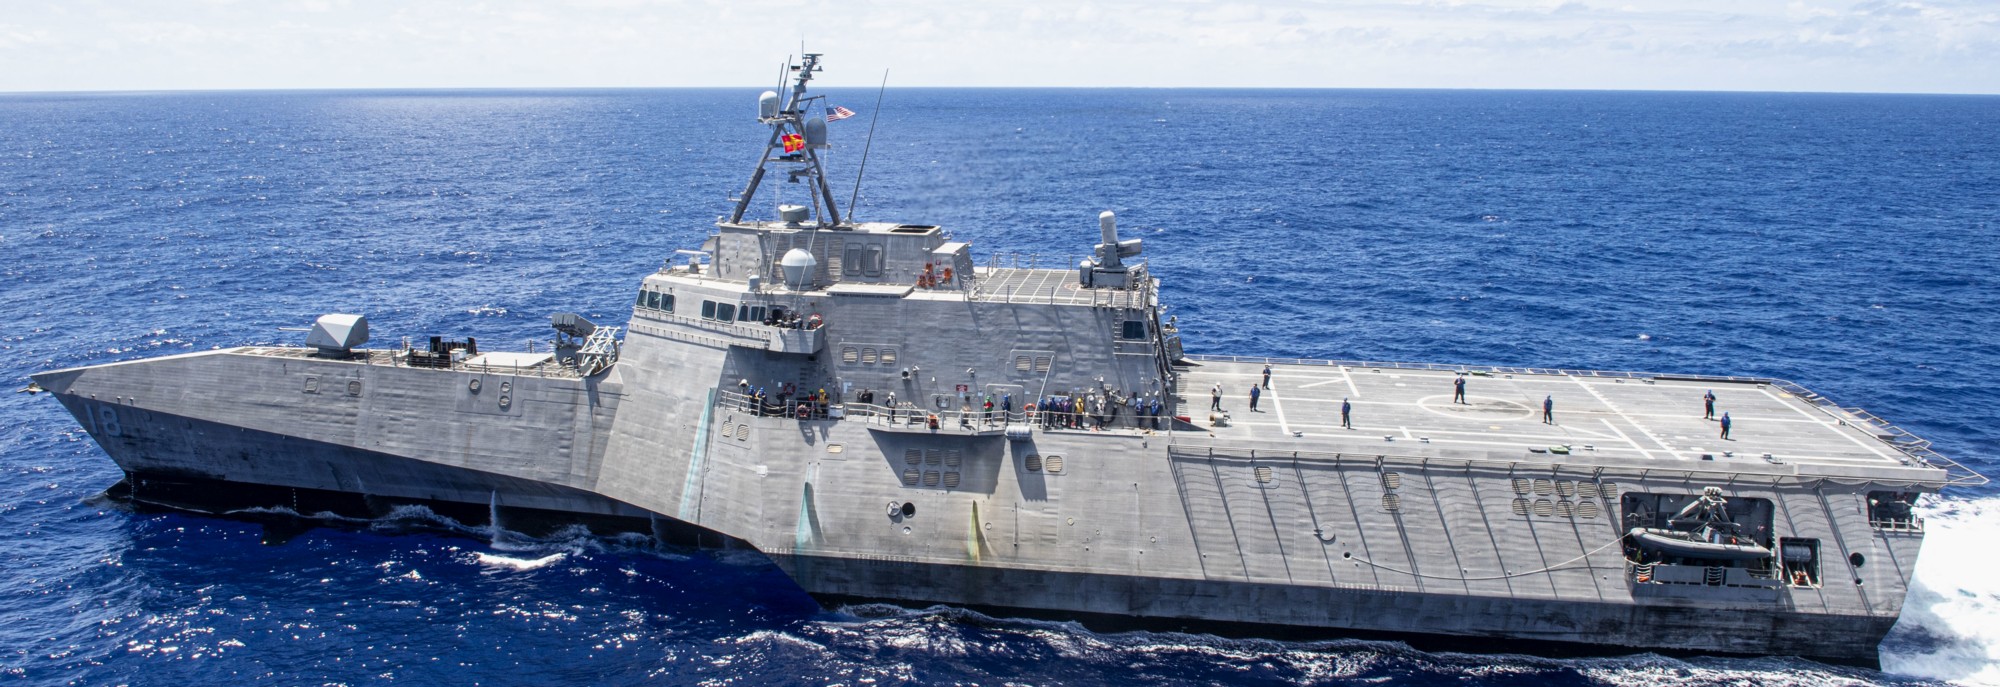 lcs-18 uss charleston independence class littoral combat ship us navy philippine sea 38